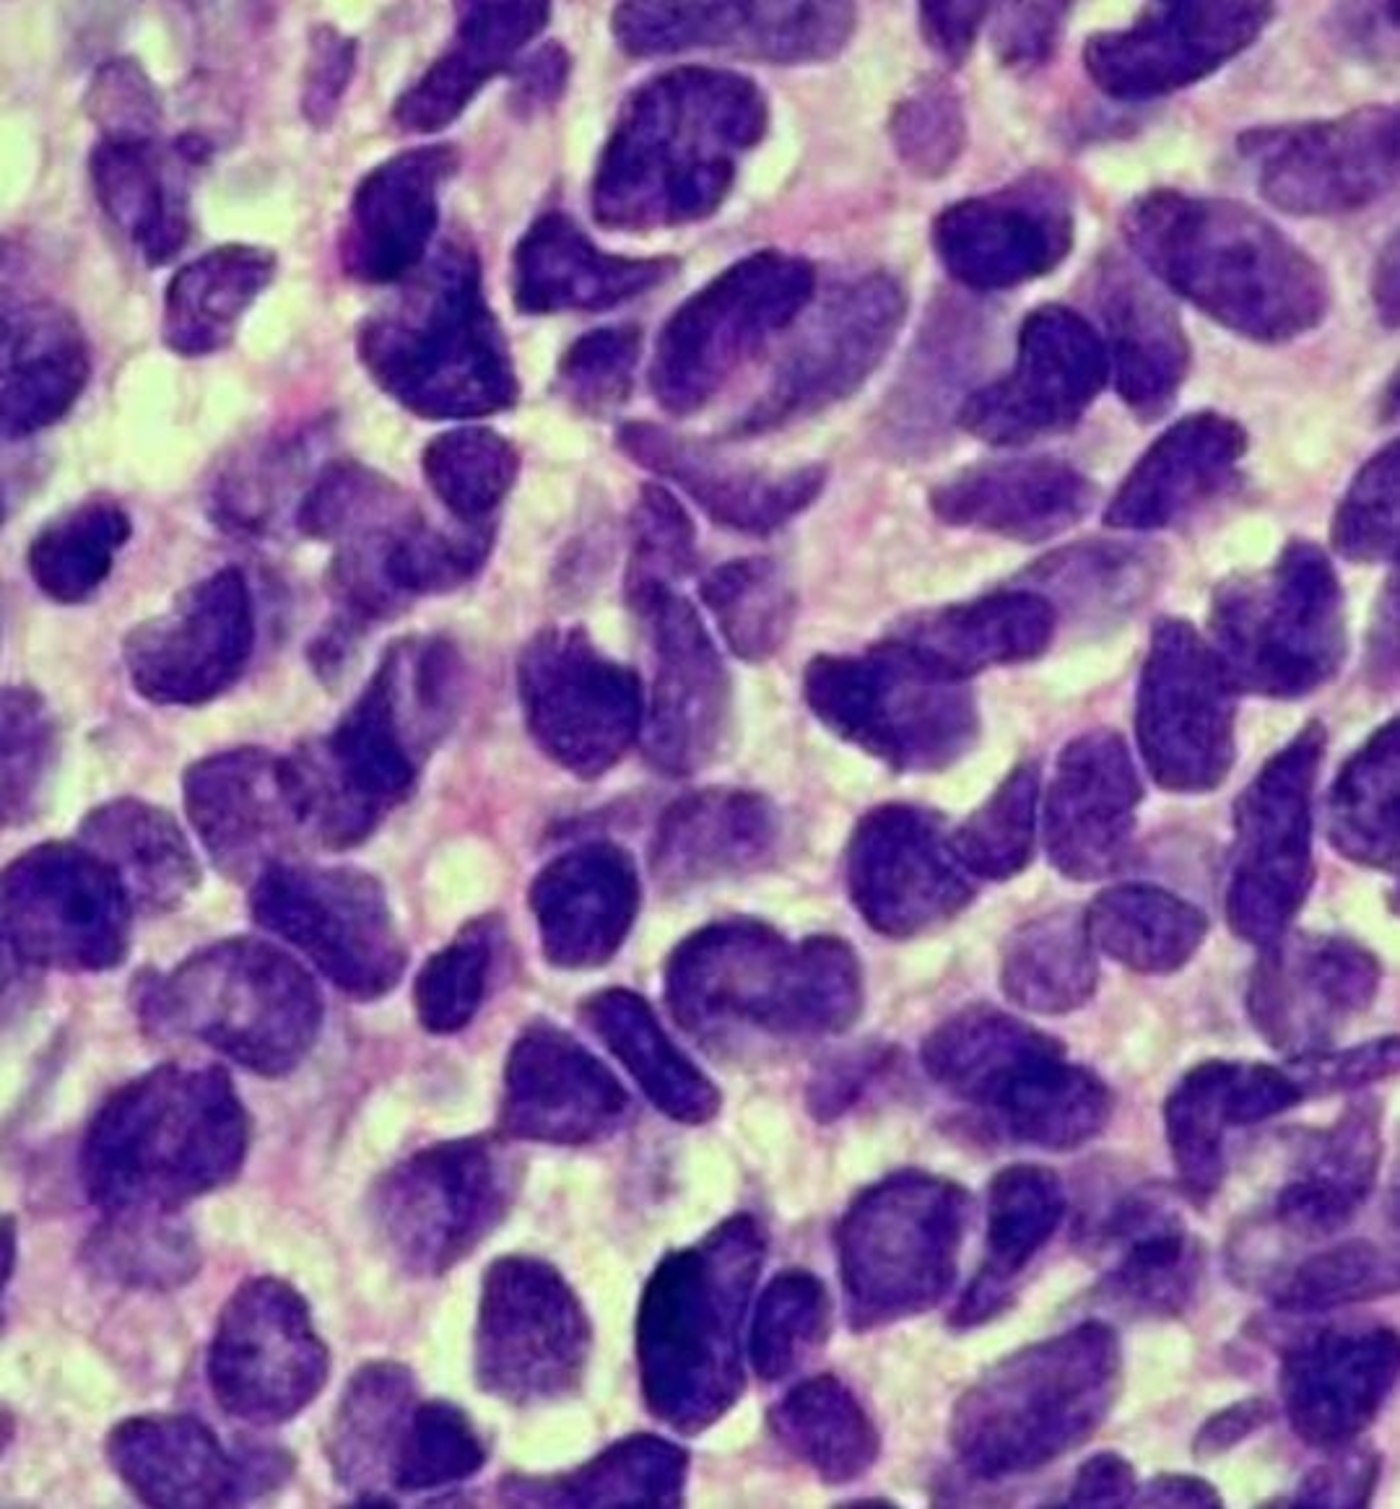 Lung cancer small cells